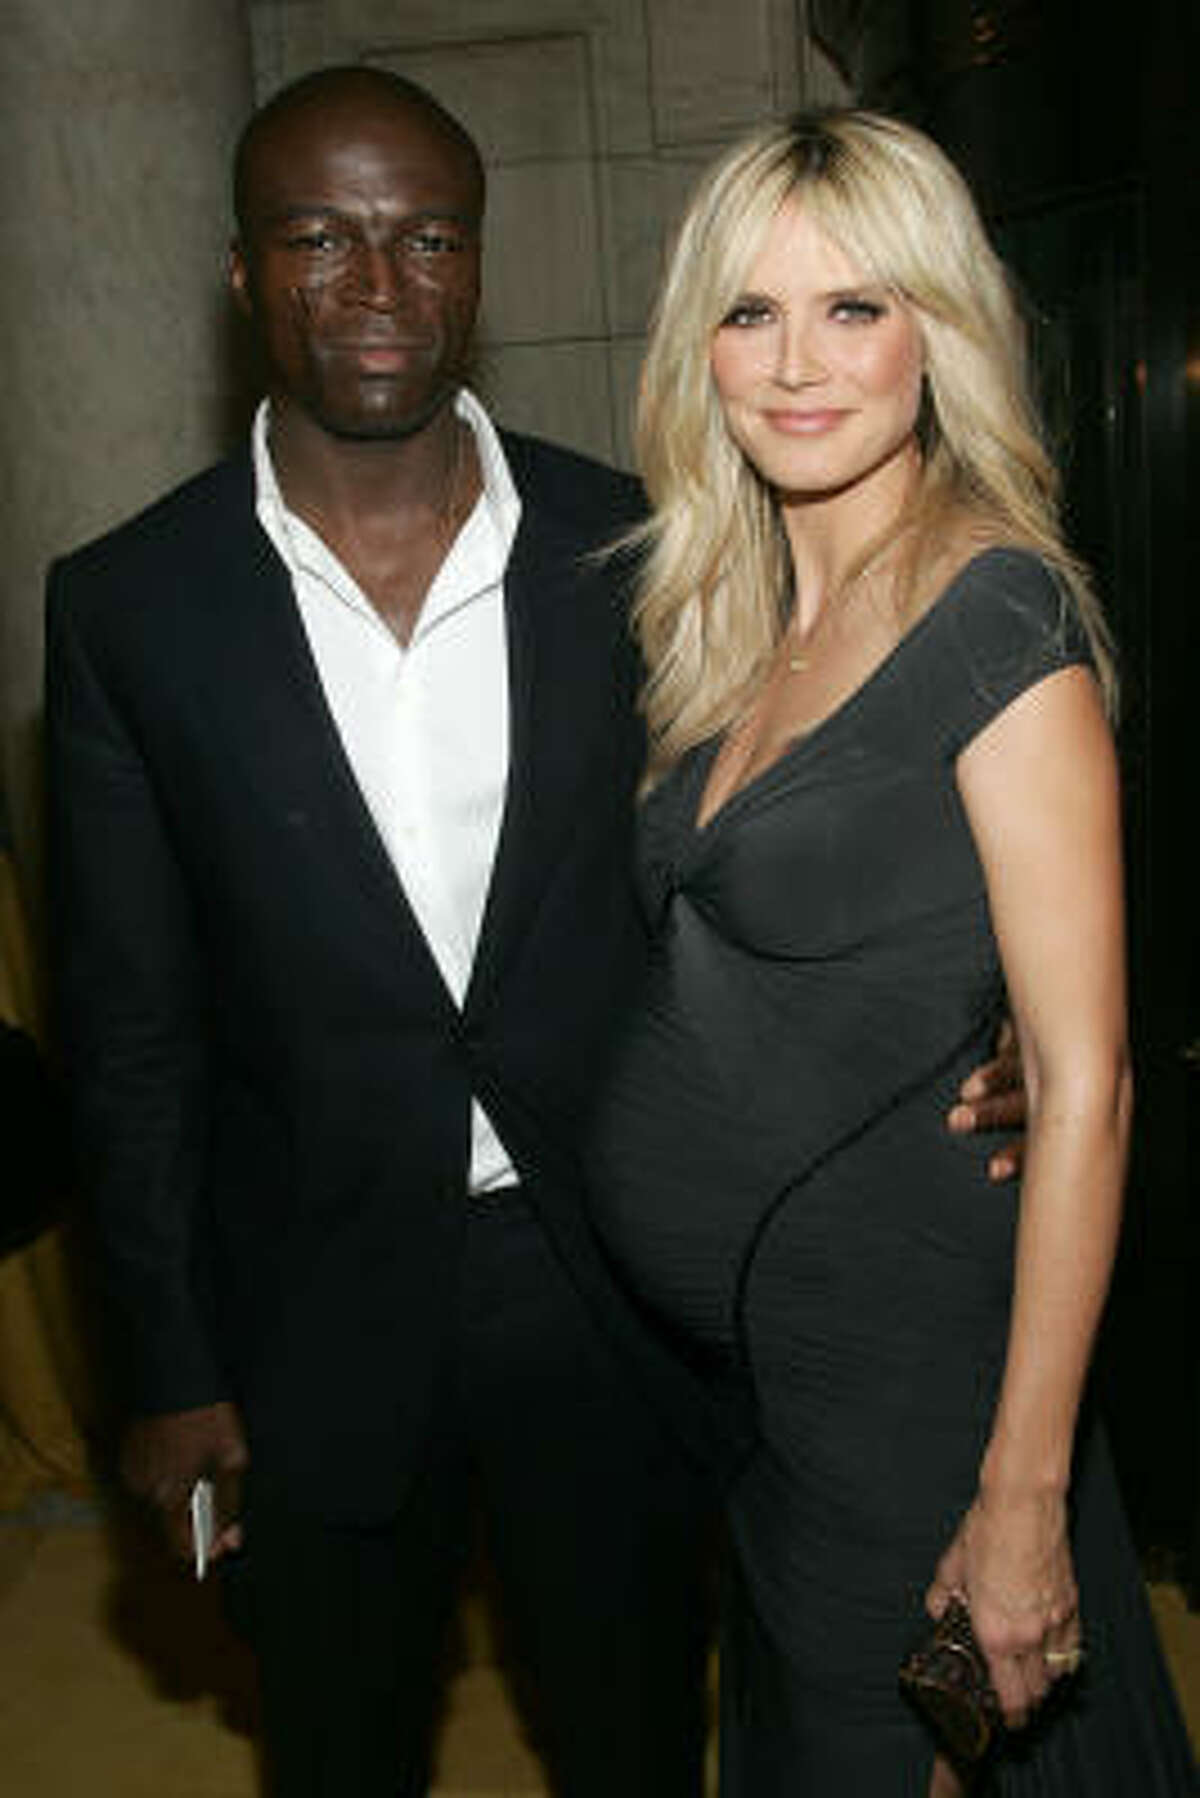 Heidi Klum She married Seal while pregnant with a child from a previous relationship. The two now have three more children together.